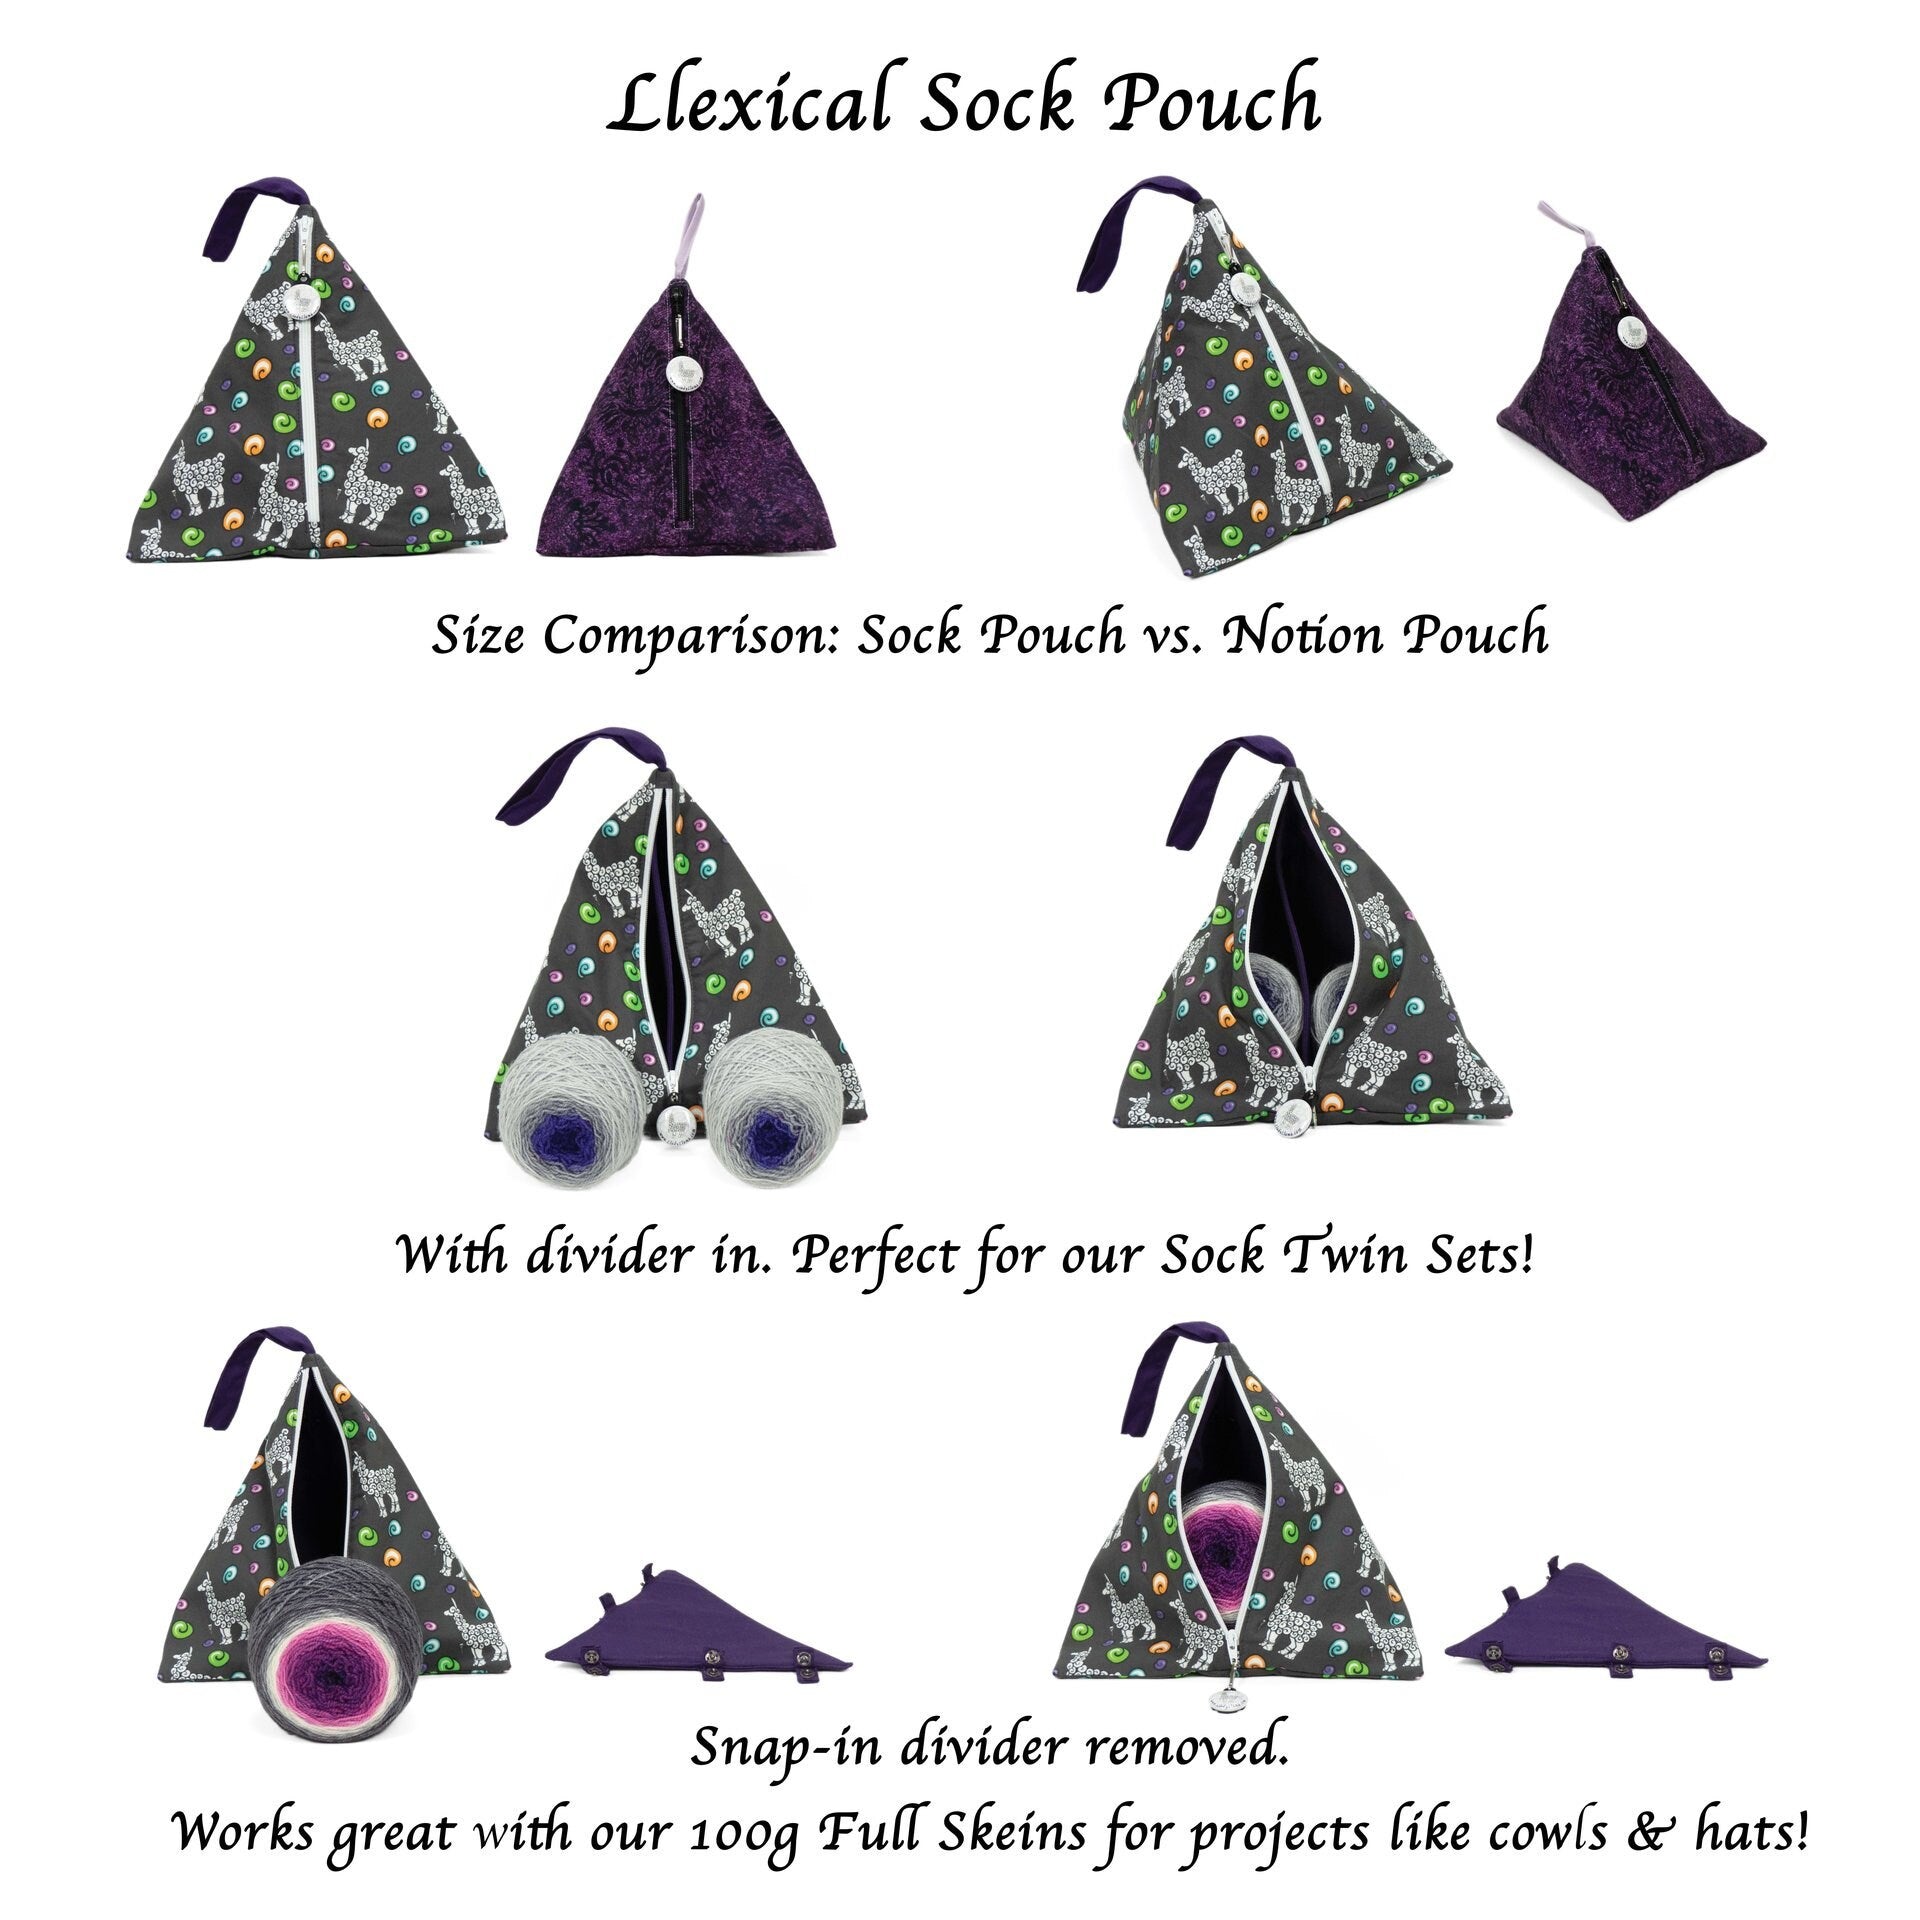 Dungeon Crawl - Llexical Divided Sock Pouch - Knitting, Crochet, Spinning Project Bag